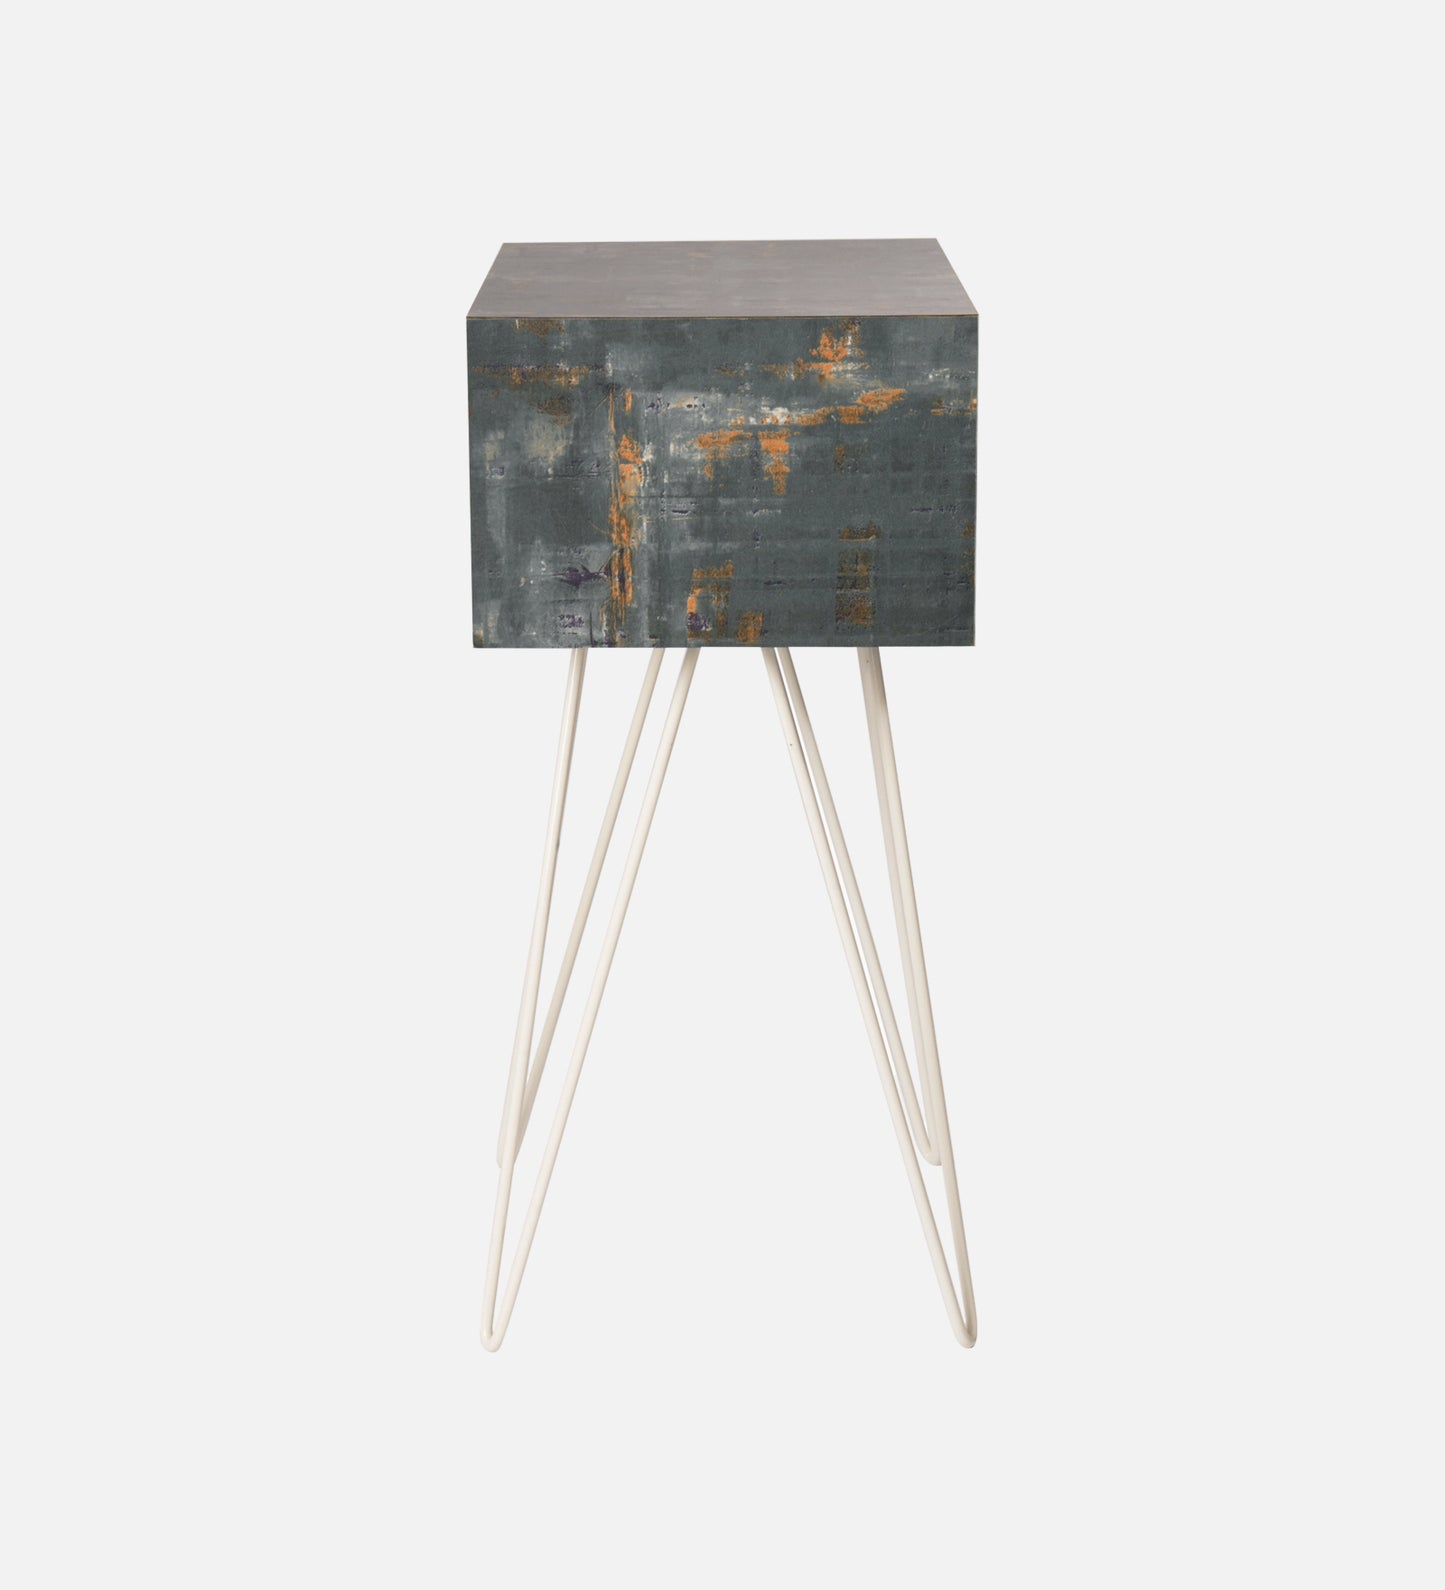 Bohemian Tint Amalgam Side Tables, Wooden Tables, Bedside Tables, End Tables, Living Room Decor by A Tiny Mistake